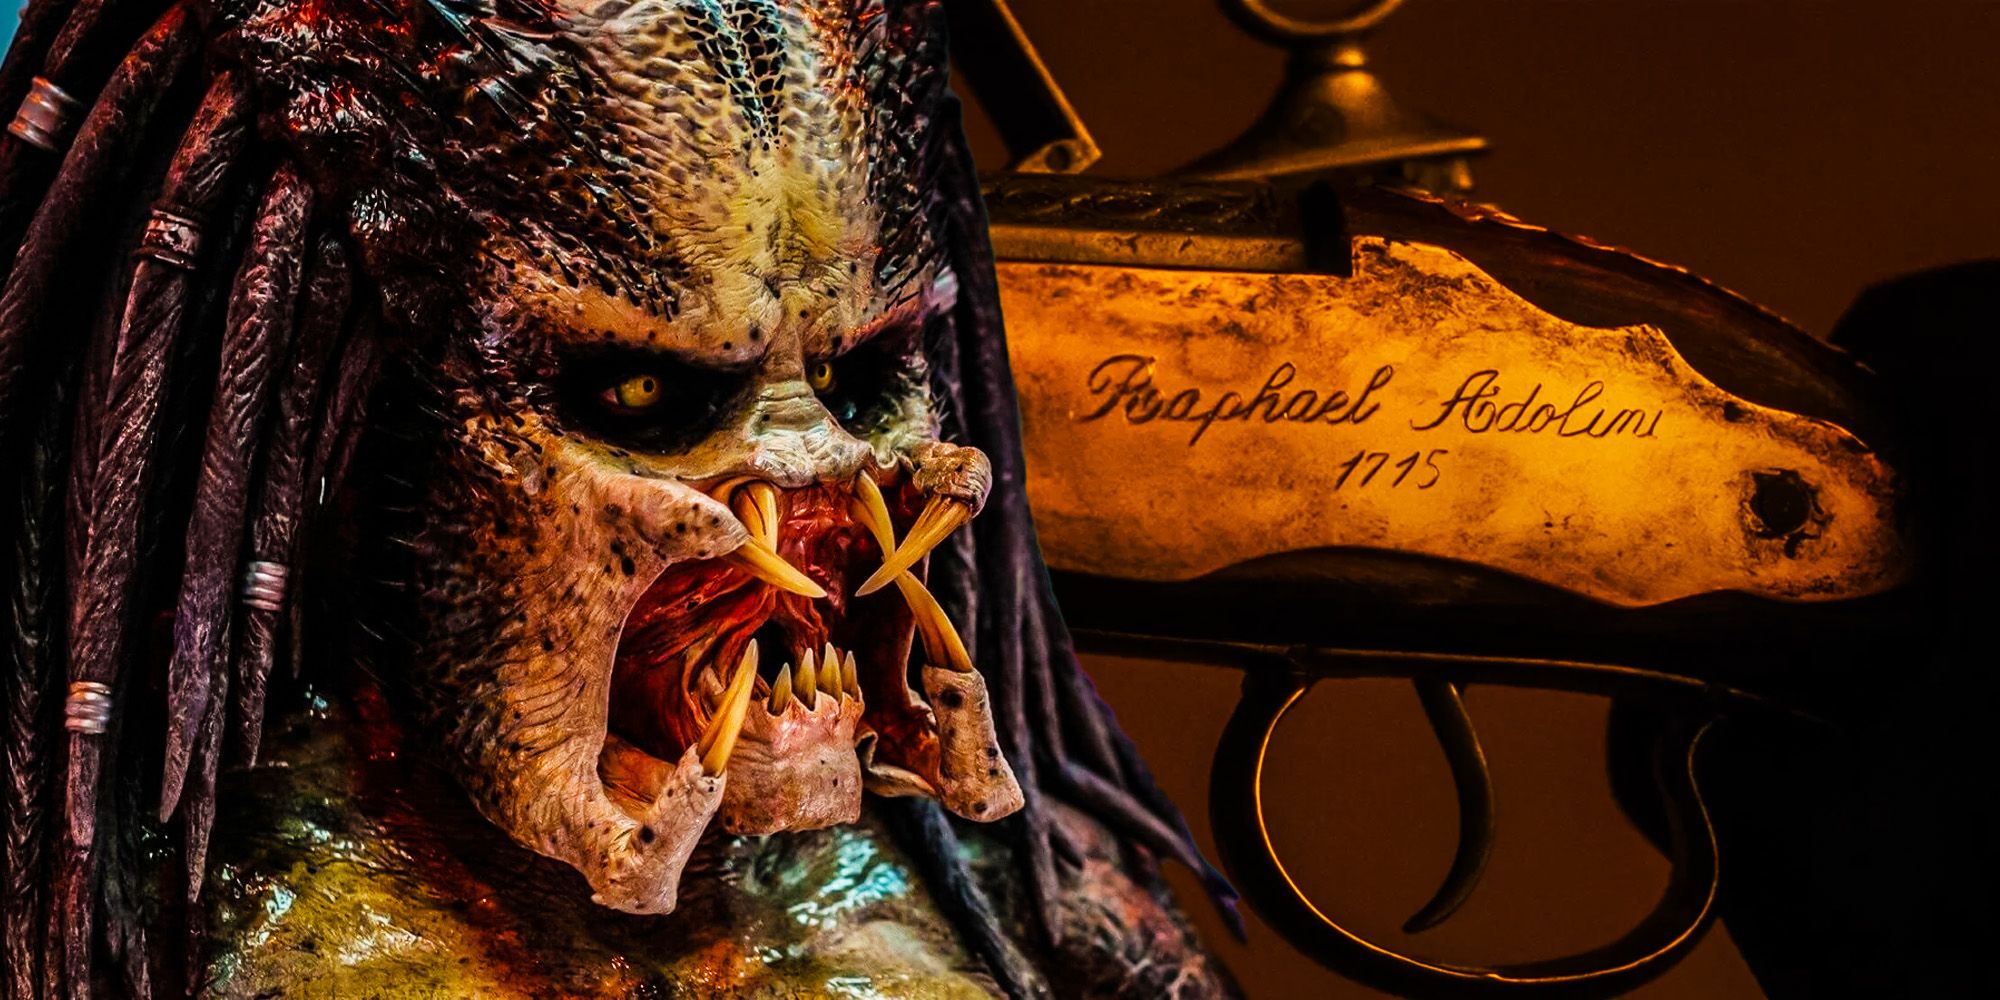 The predator legacy character series must introduce raphael adolini